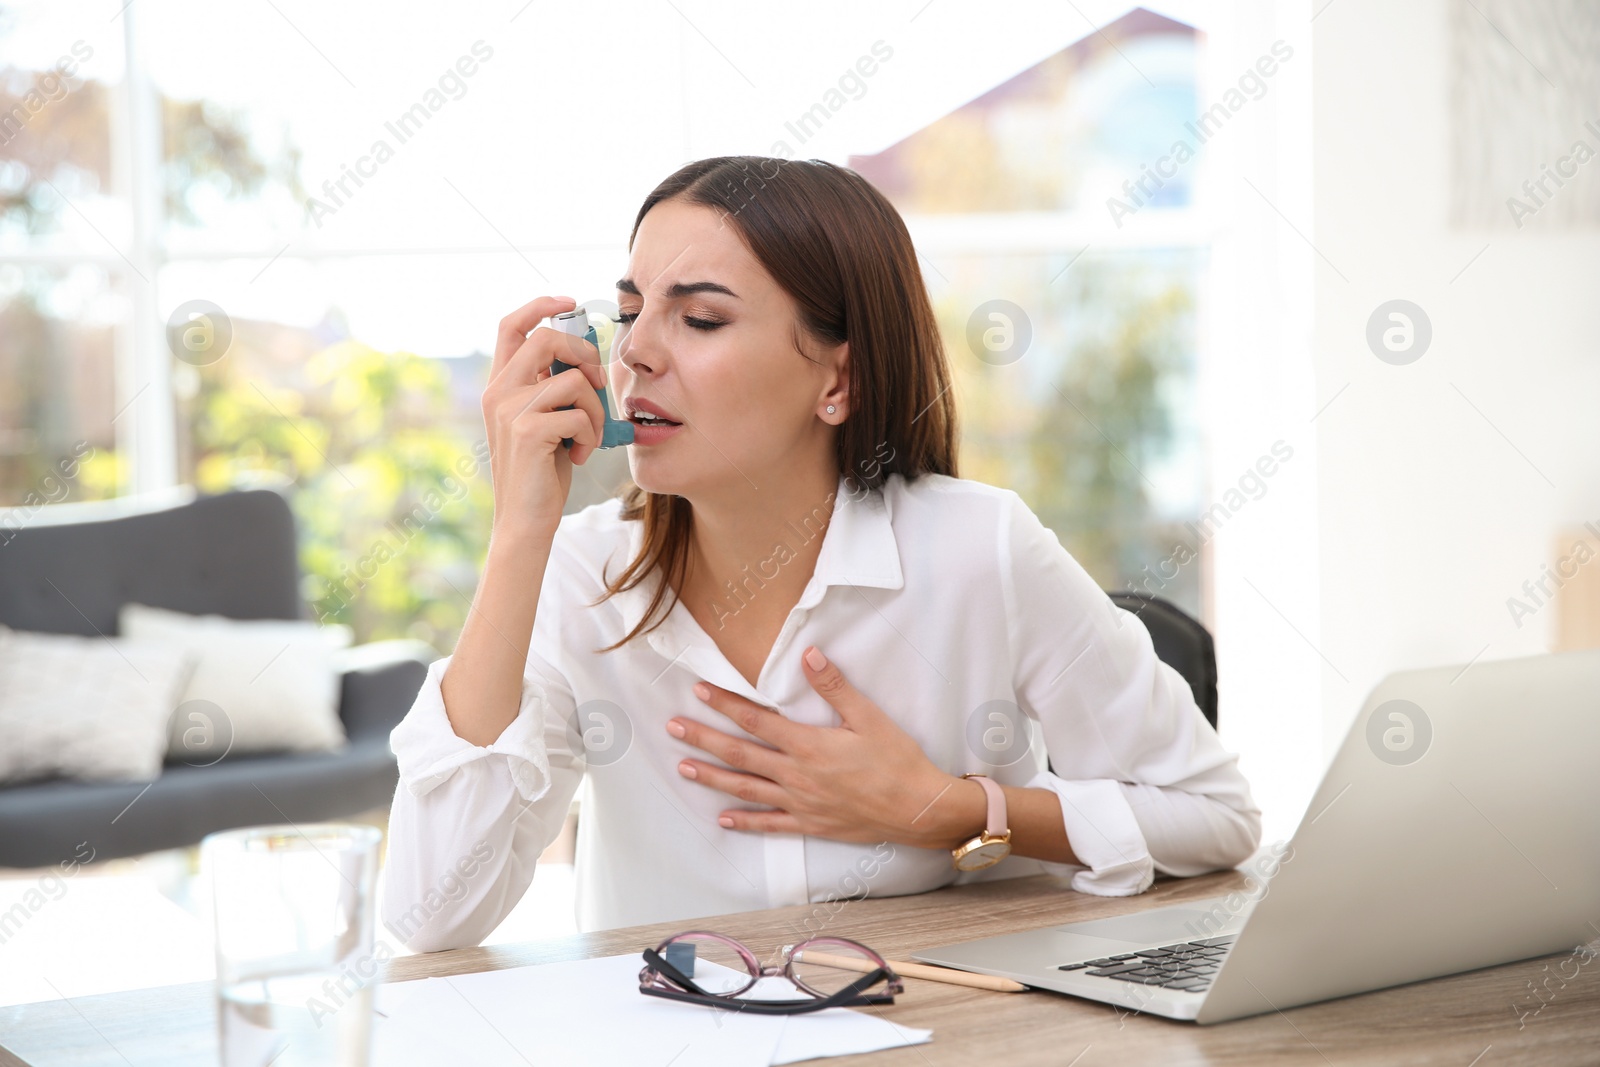 Photo of Young woman with asthma inhaler at table in light room